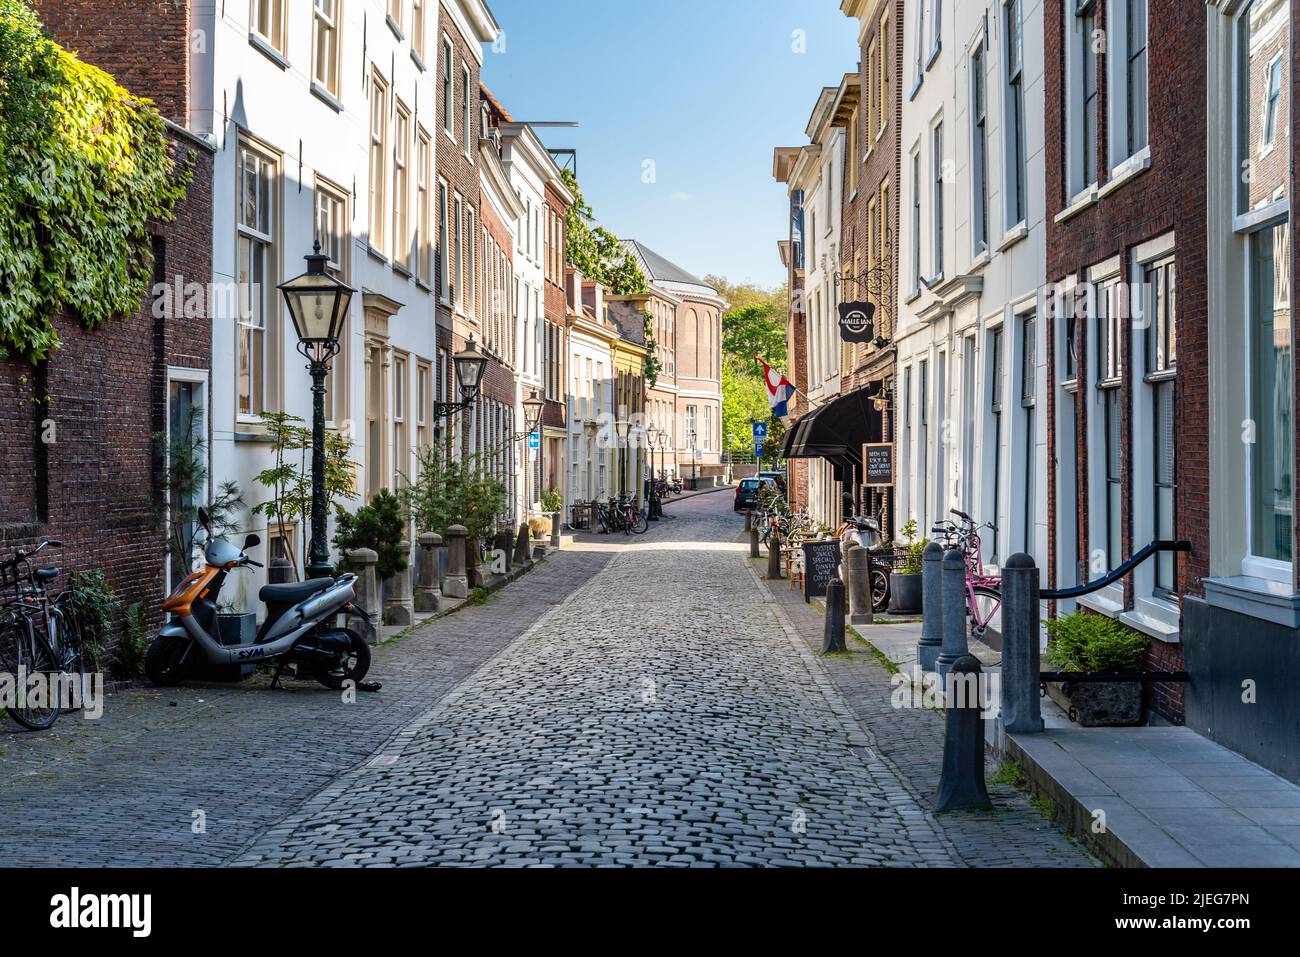 Leiden, Netherlands - May 6, 2022: Picturesque old street in the old town Stock Photo